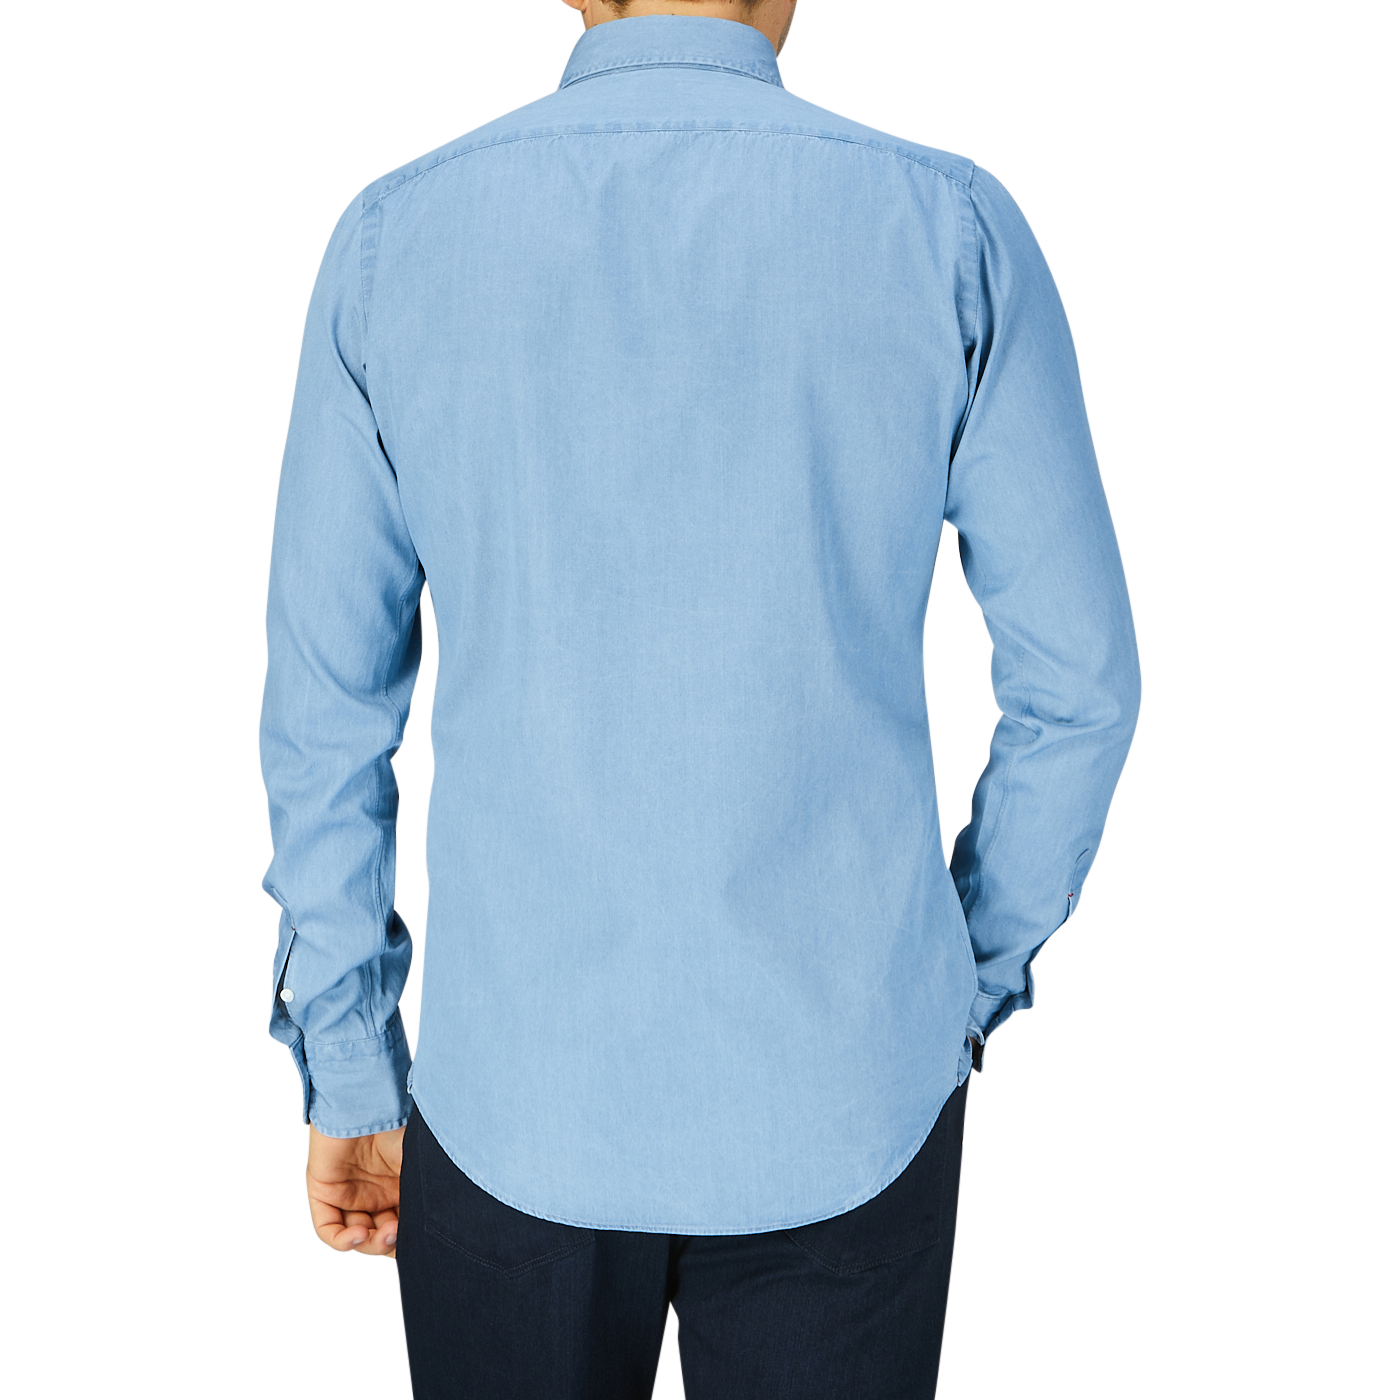 A man seen from behind, wearing a Mazzarelli Light Blue Washed Denim BD Slim Shirt and dark trousers.